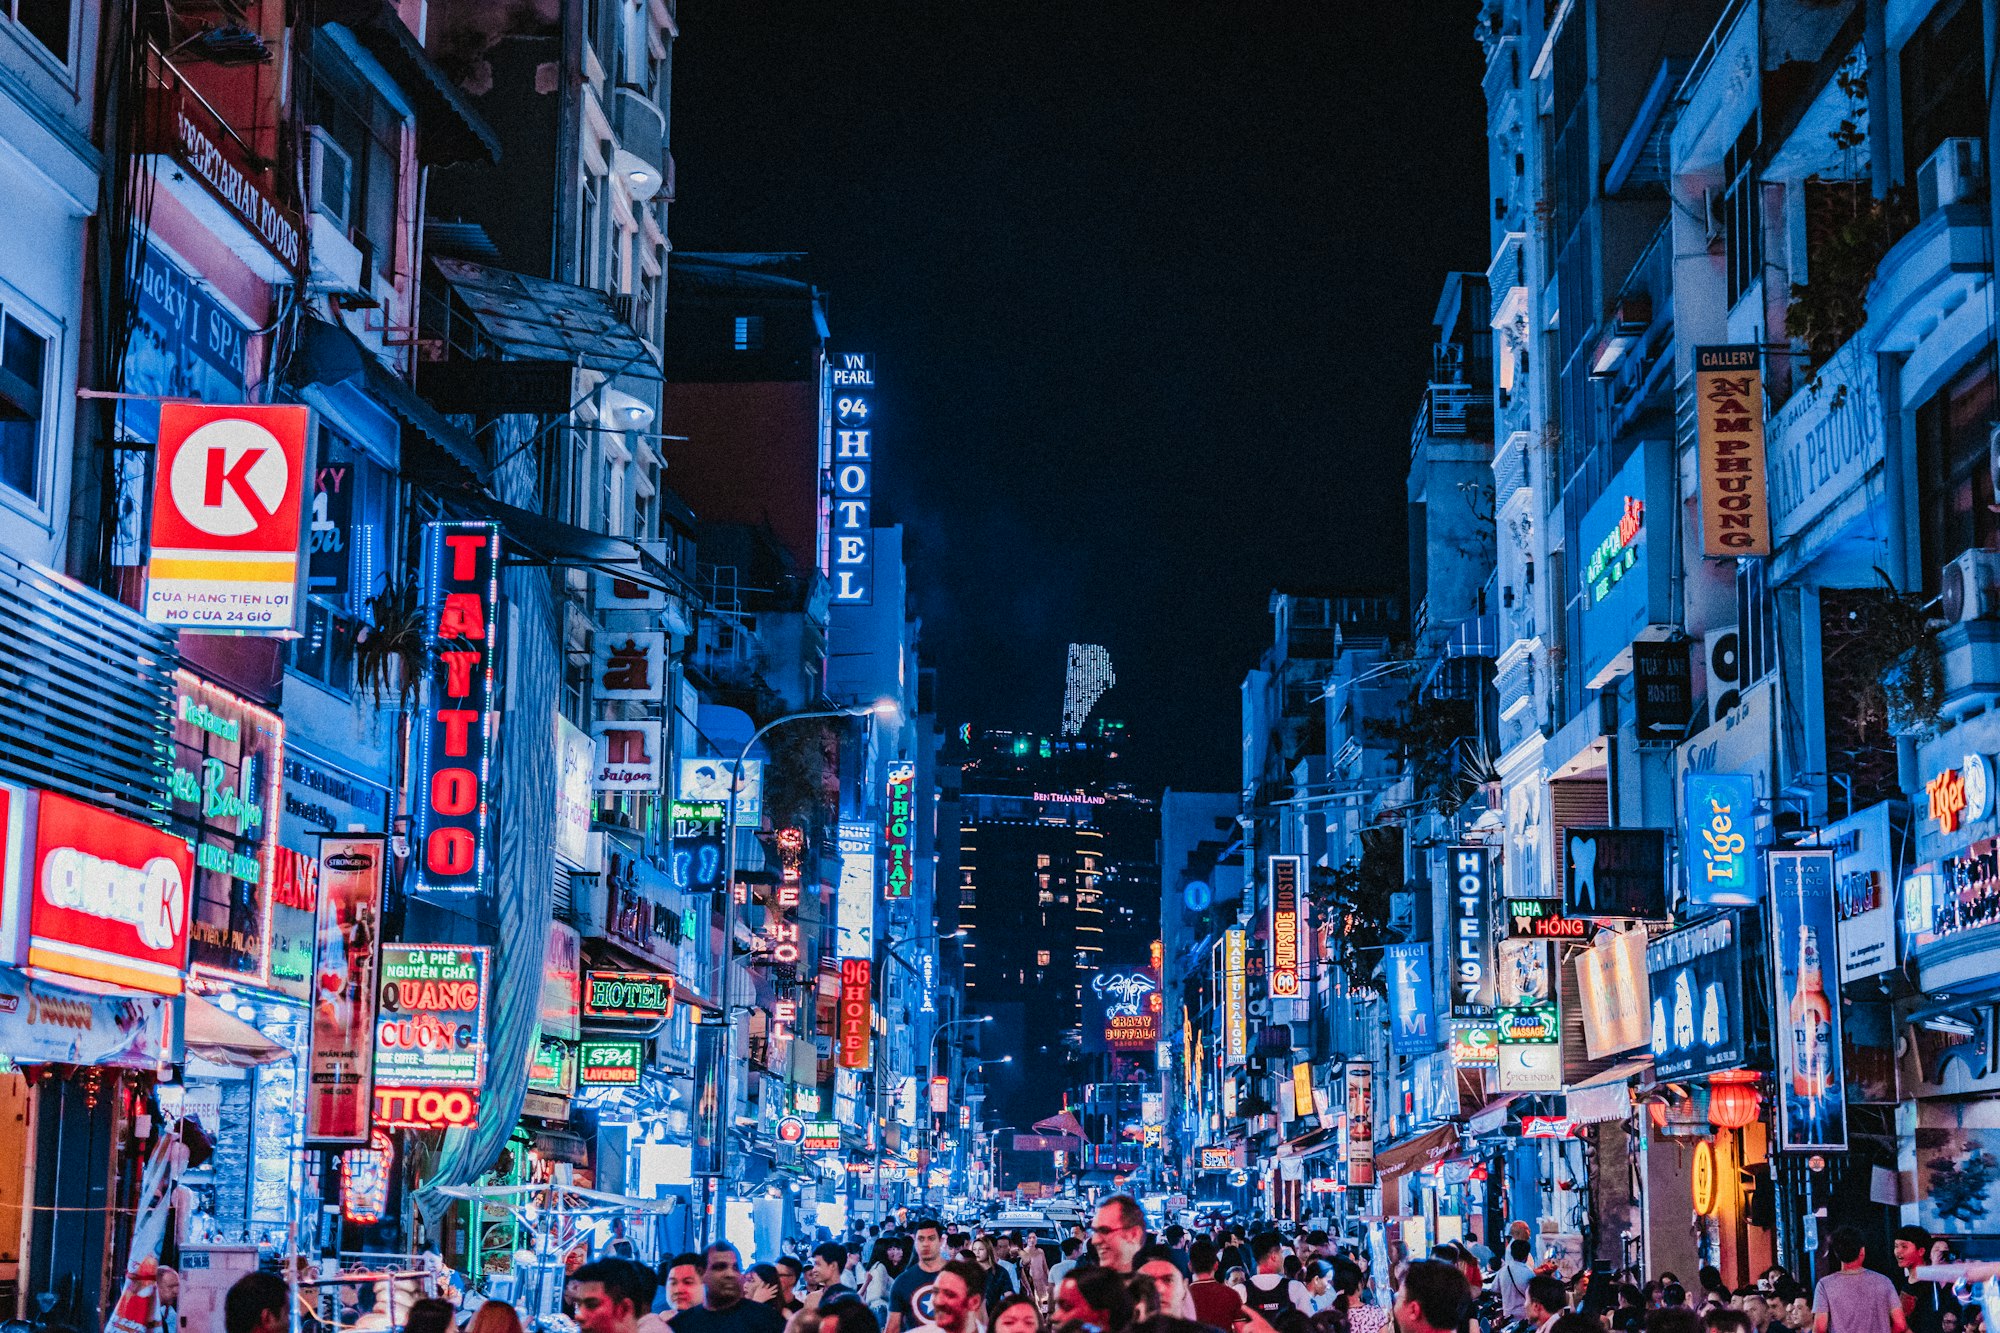 The city that never sleeps, took this shot at Bui Vien street in Ho Chi Minh, one of the most crazy party streets that i have seen!